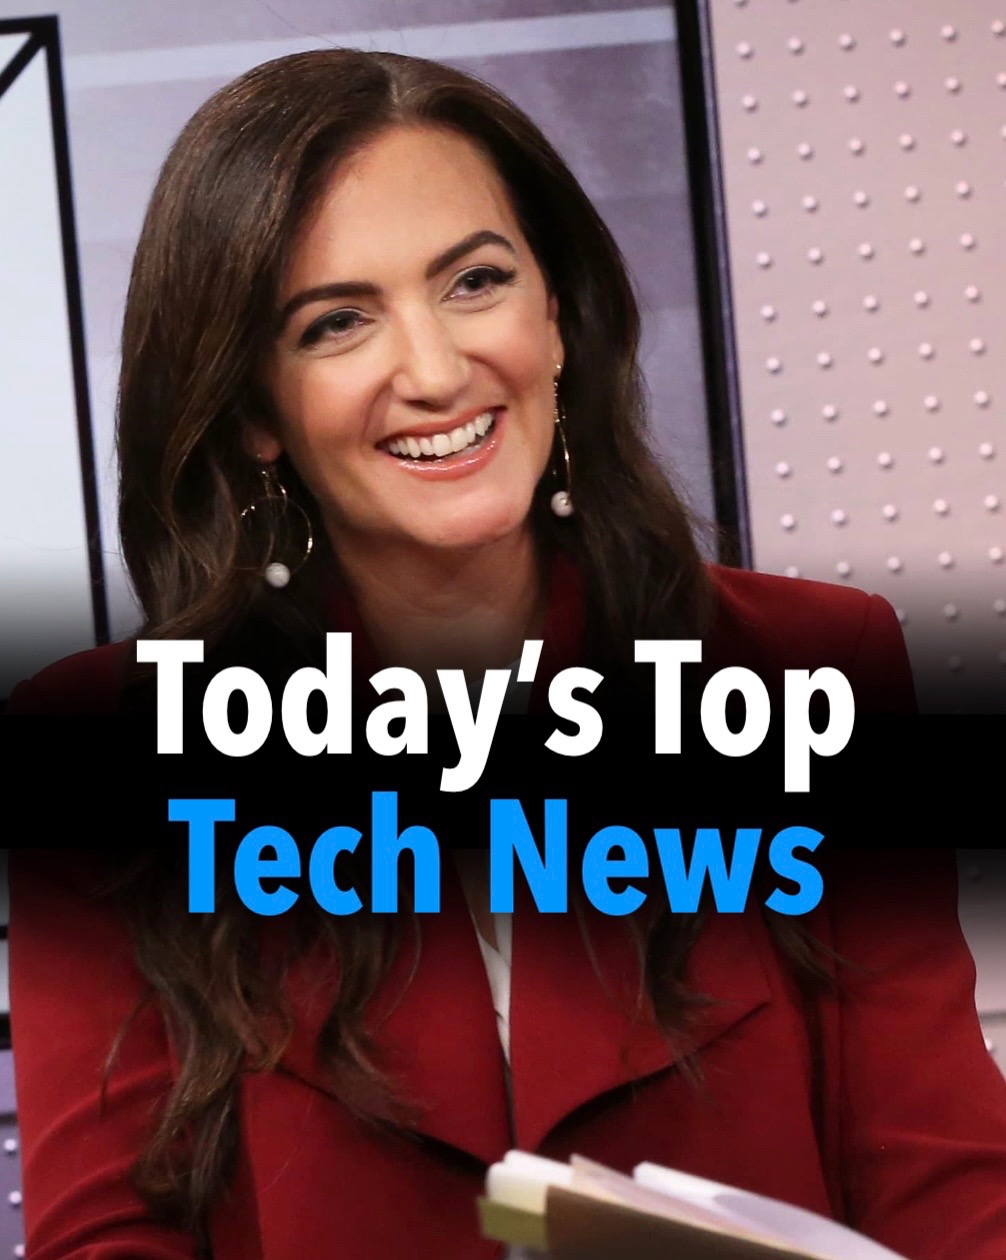 Top tech stories to know today | Apr 15 #ai #technology #fyp #news #fashion #phone